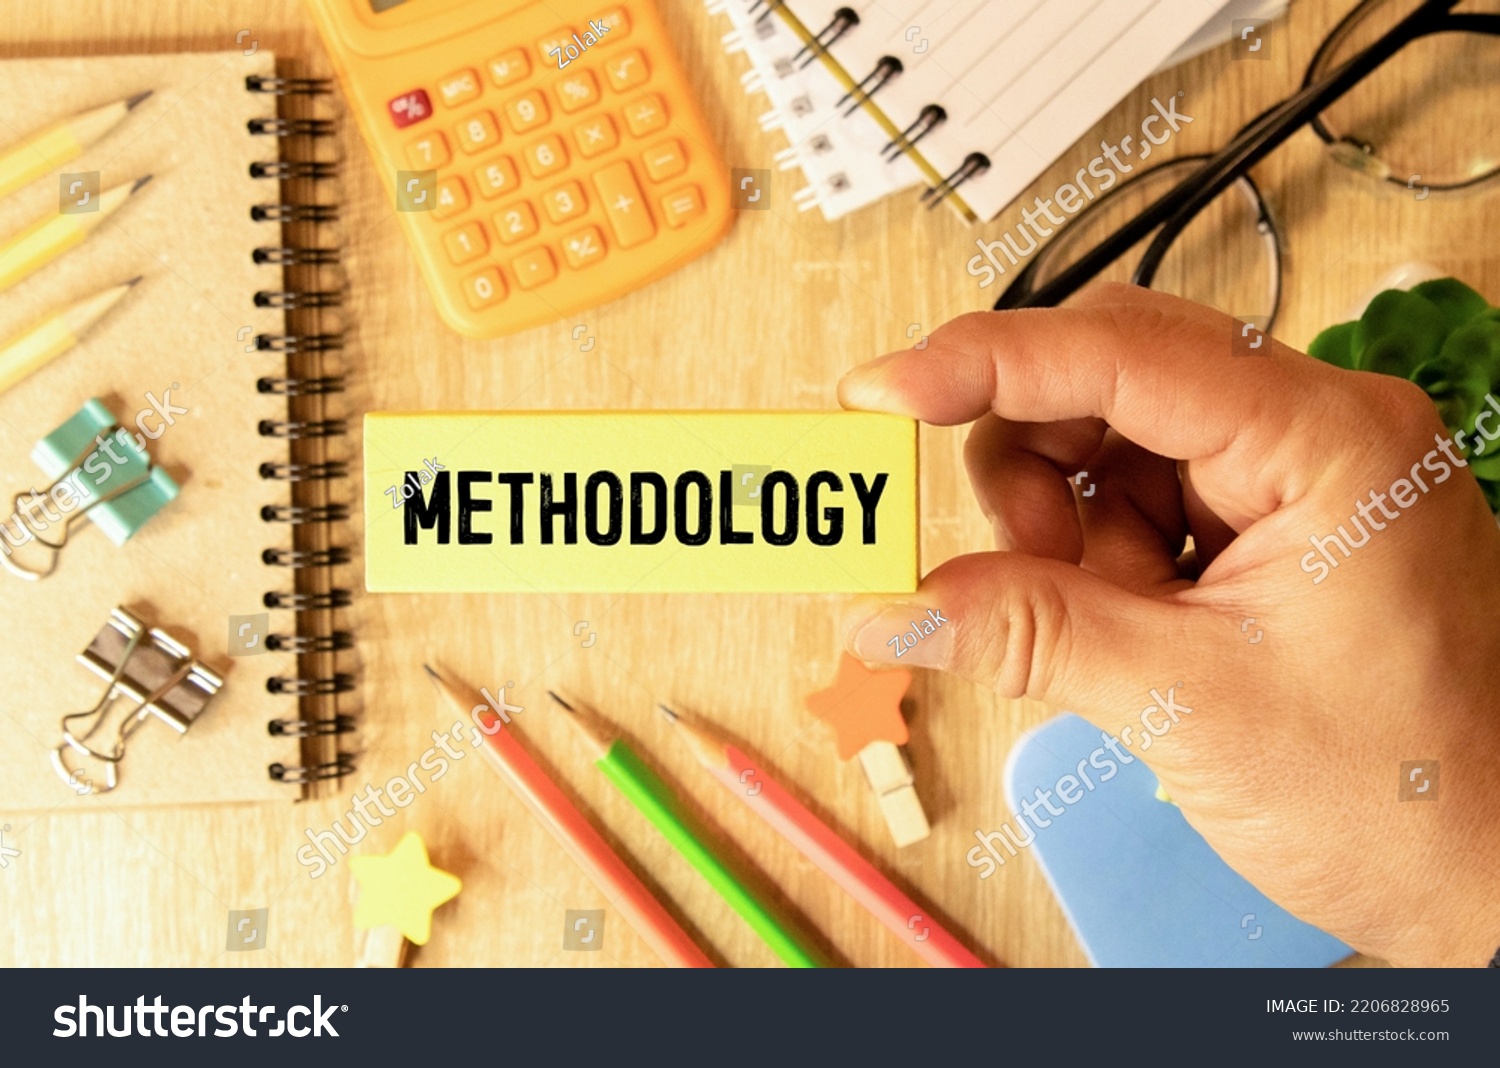 The word methodology written on a notebook on business office desktop. System of methods used in a study or activity concept. #2206828965